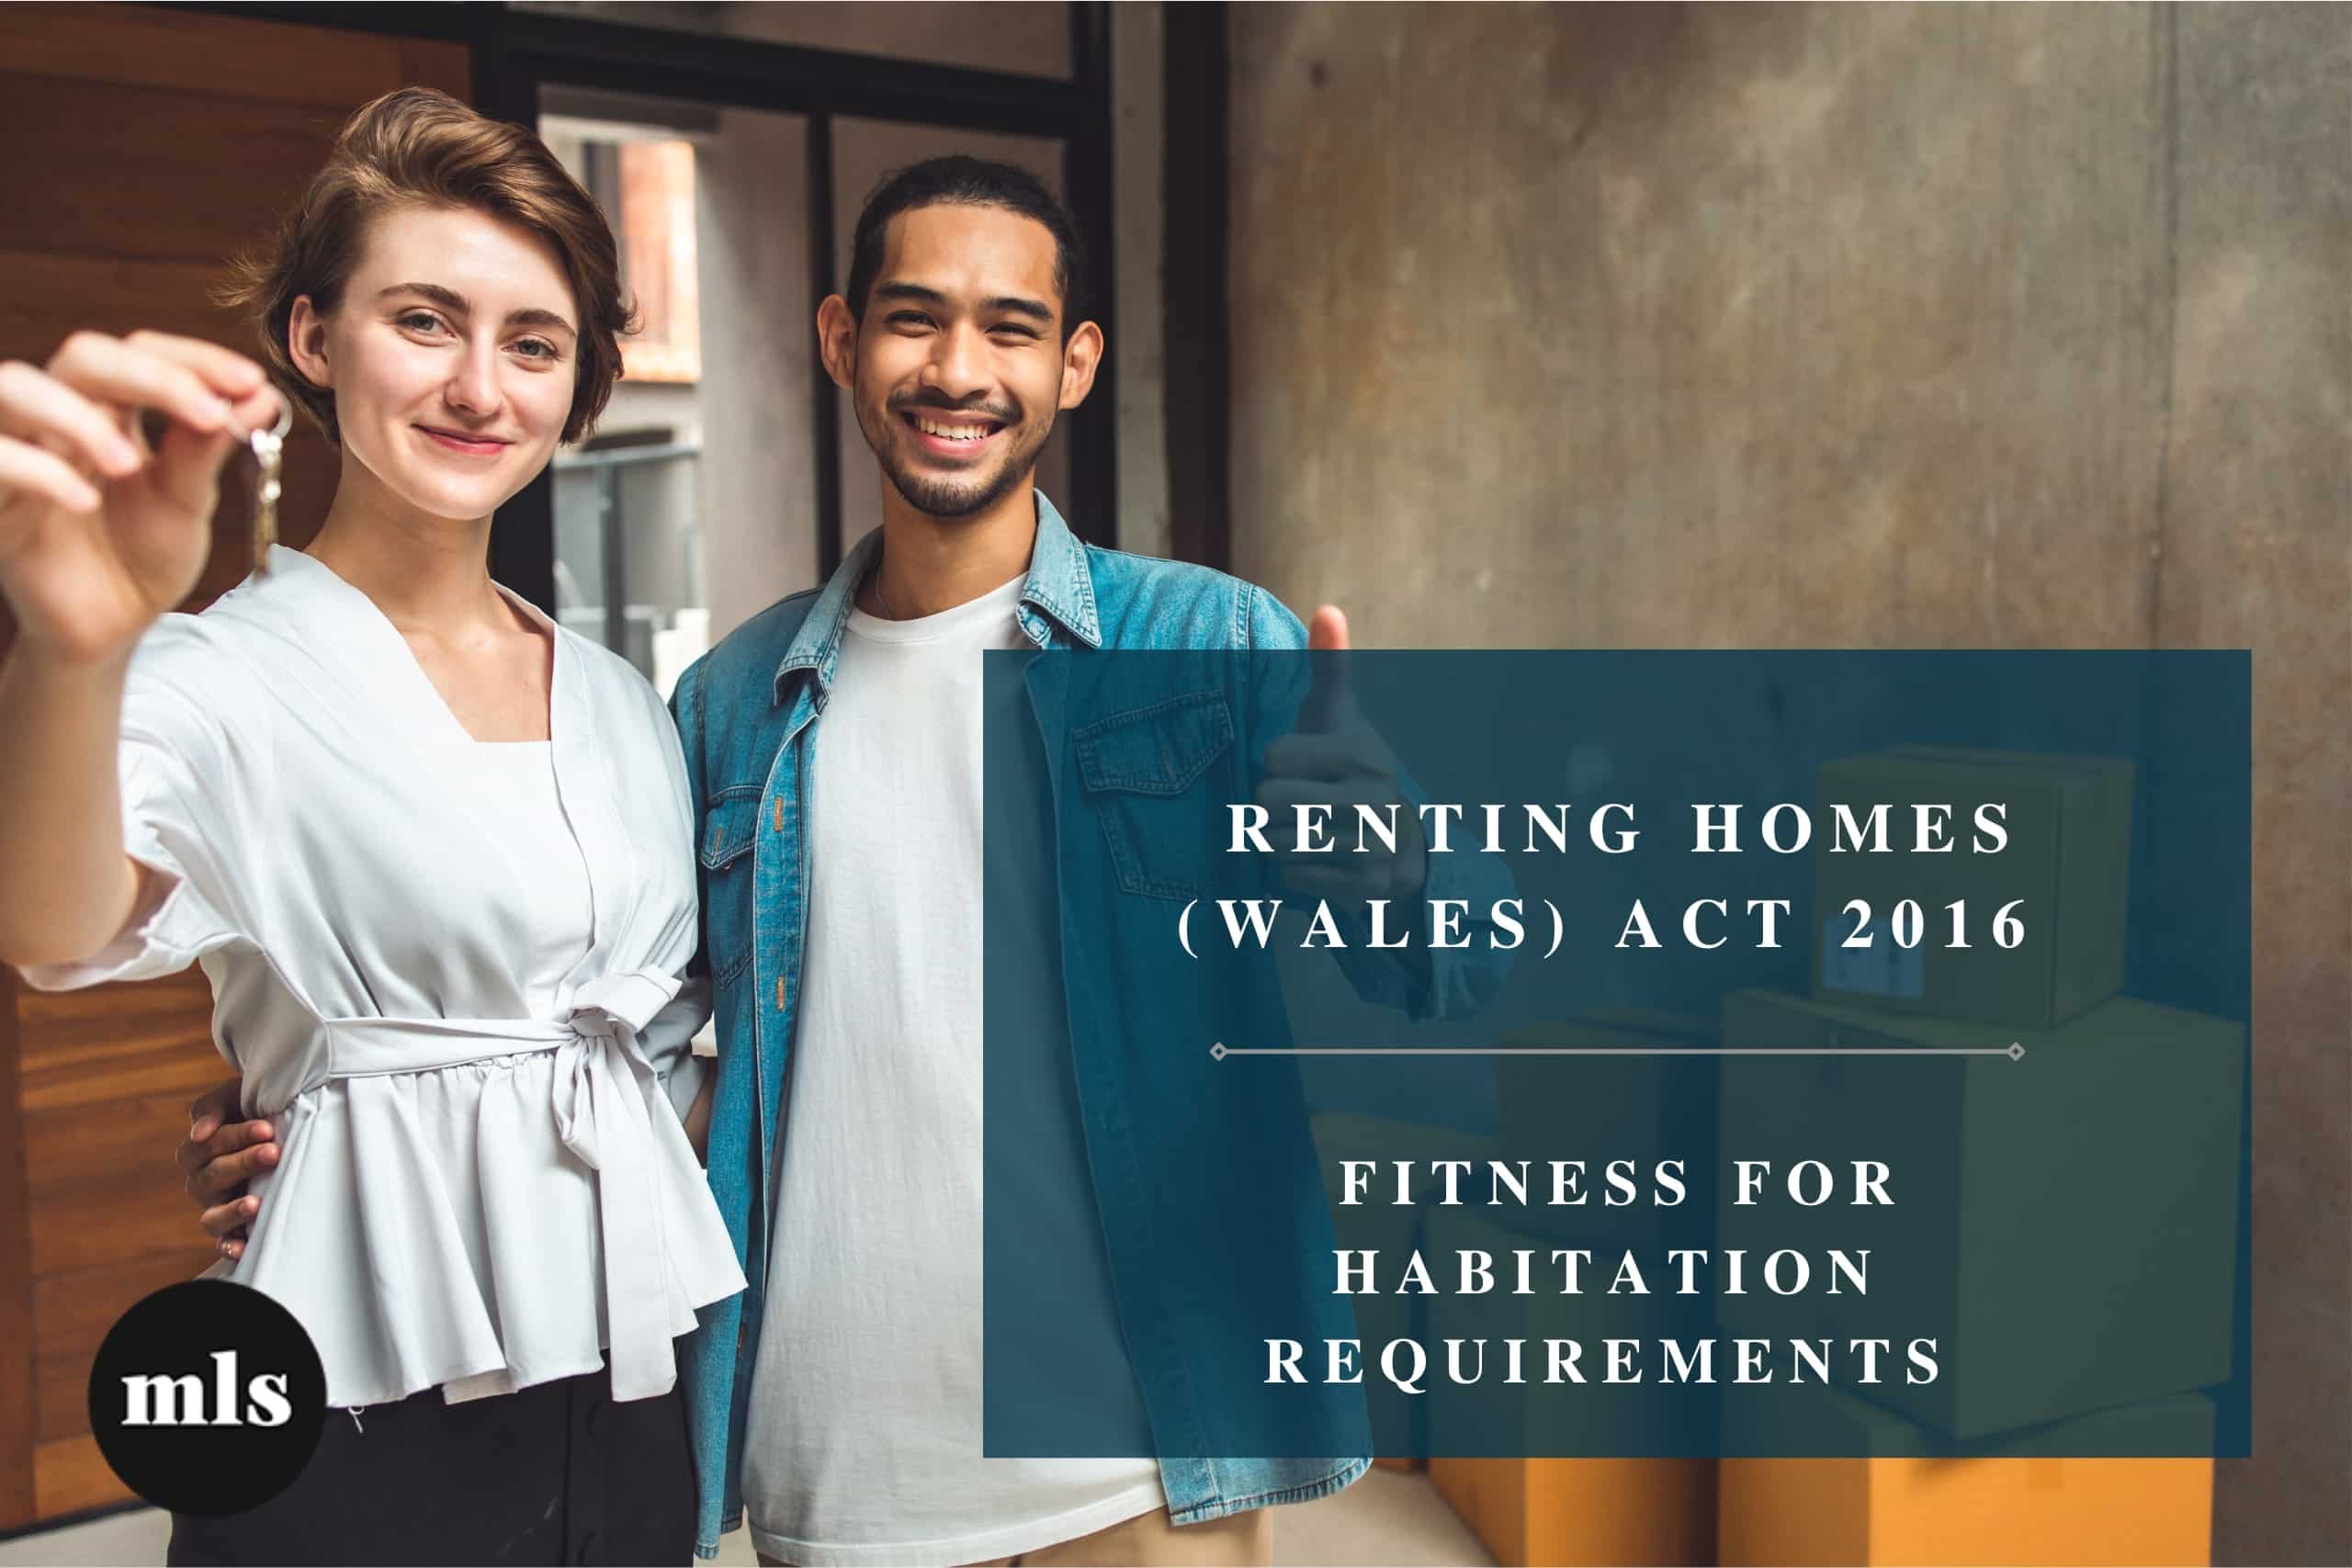 RENTING HOMES (WALES) ACT 2016 – FITNESS FOR HABITATION REQUIREMENTS